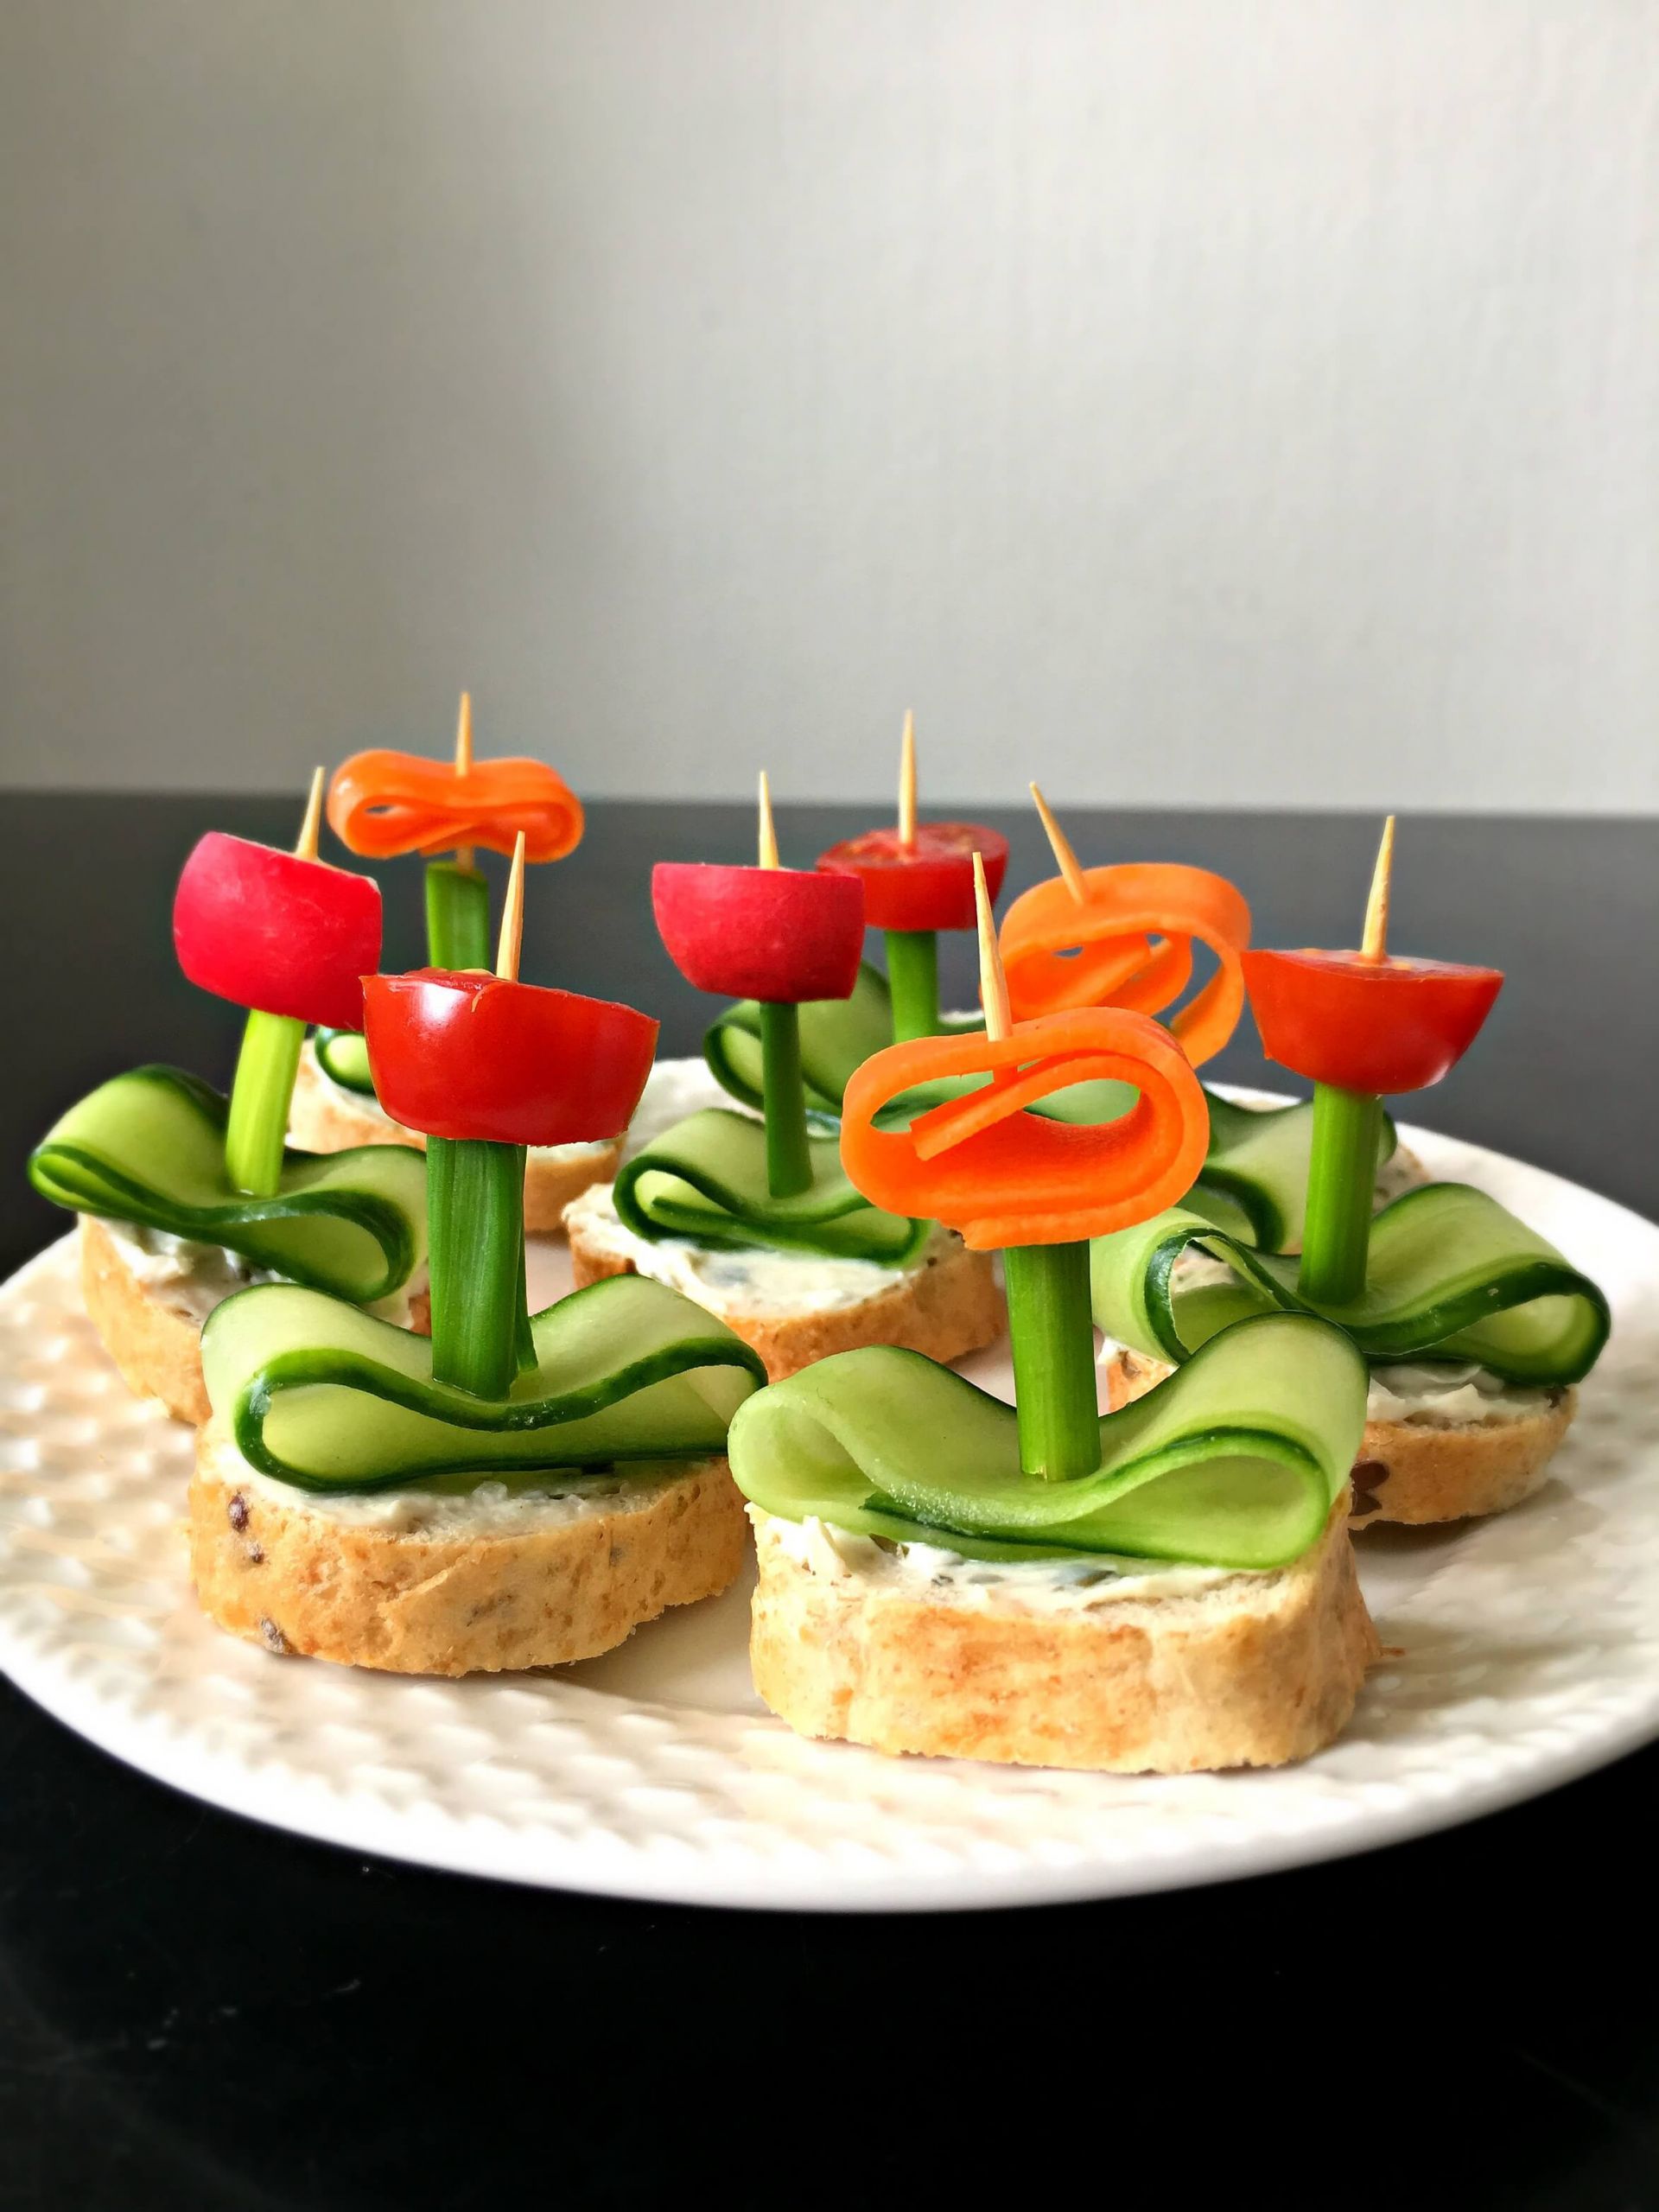 Easy Vegan Appetizers
 Vegan Flower Appetizers with Herb "Cream Cheese"